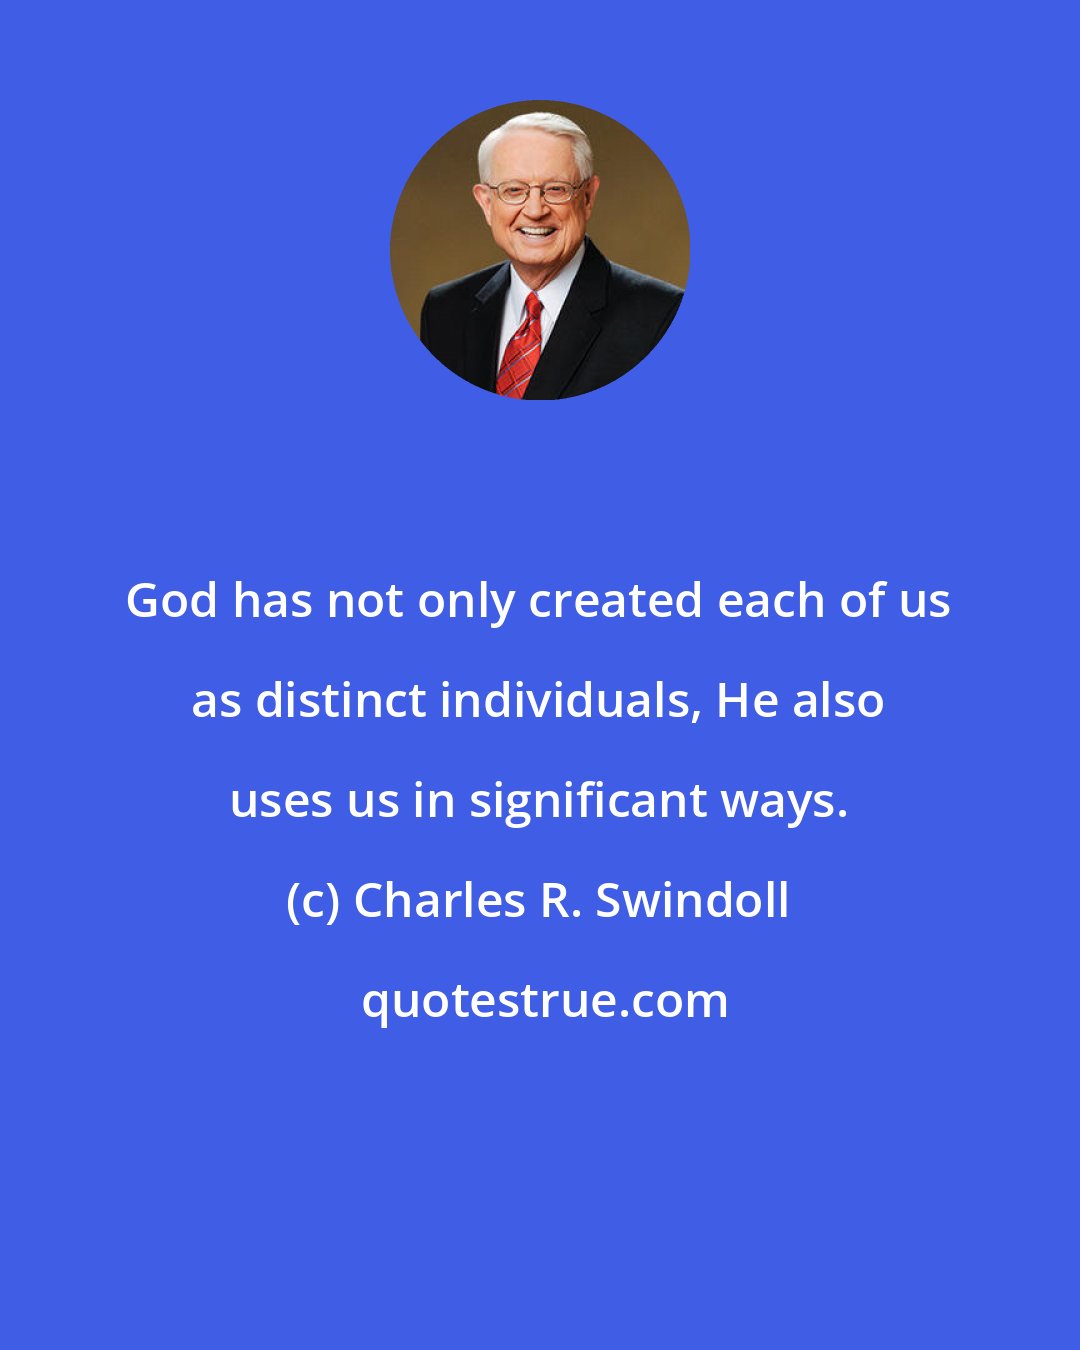 Charles R. Swindoll: God has not only created each of us as distinct individuals, He also uses us in significant ways.